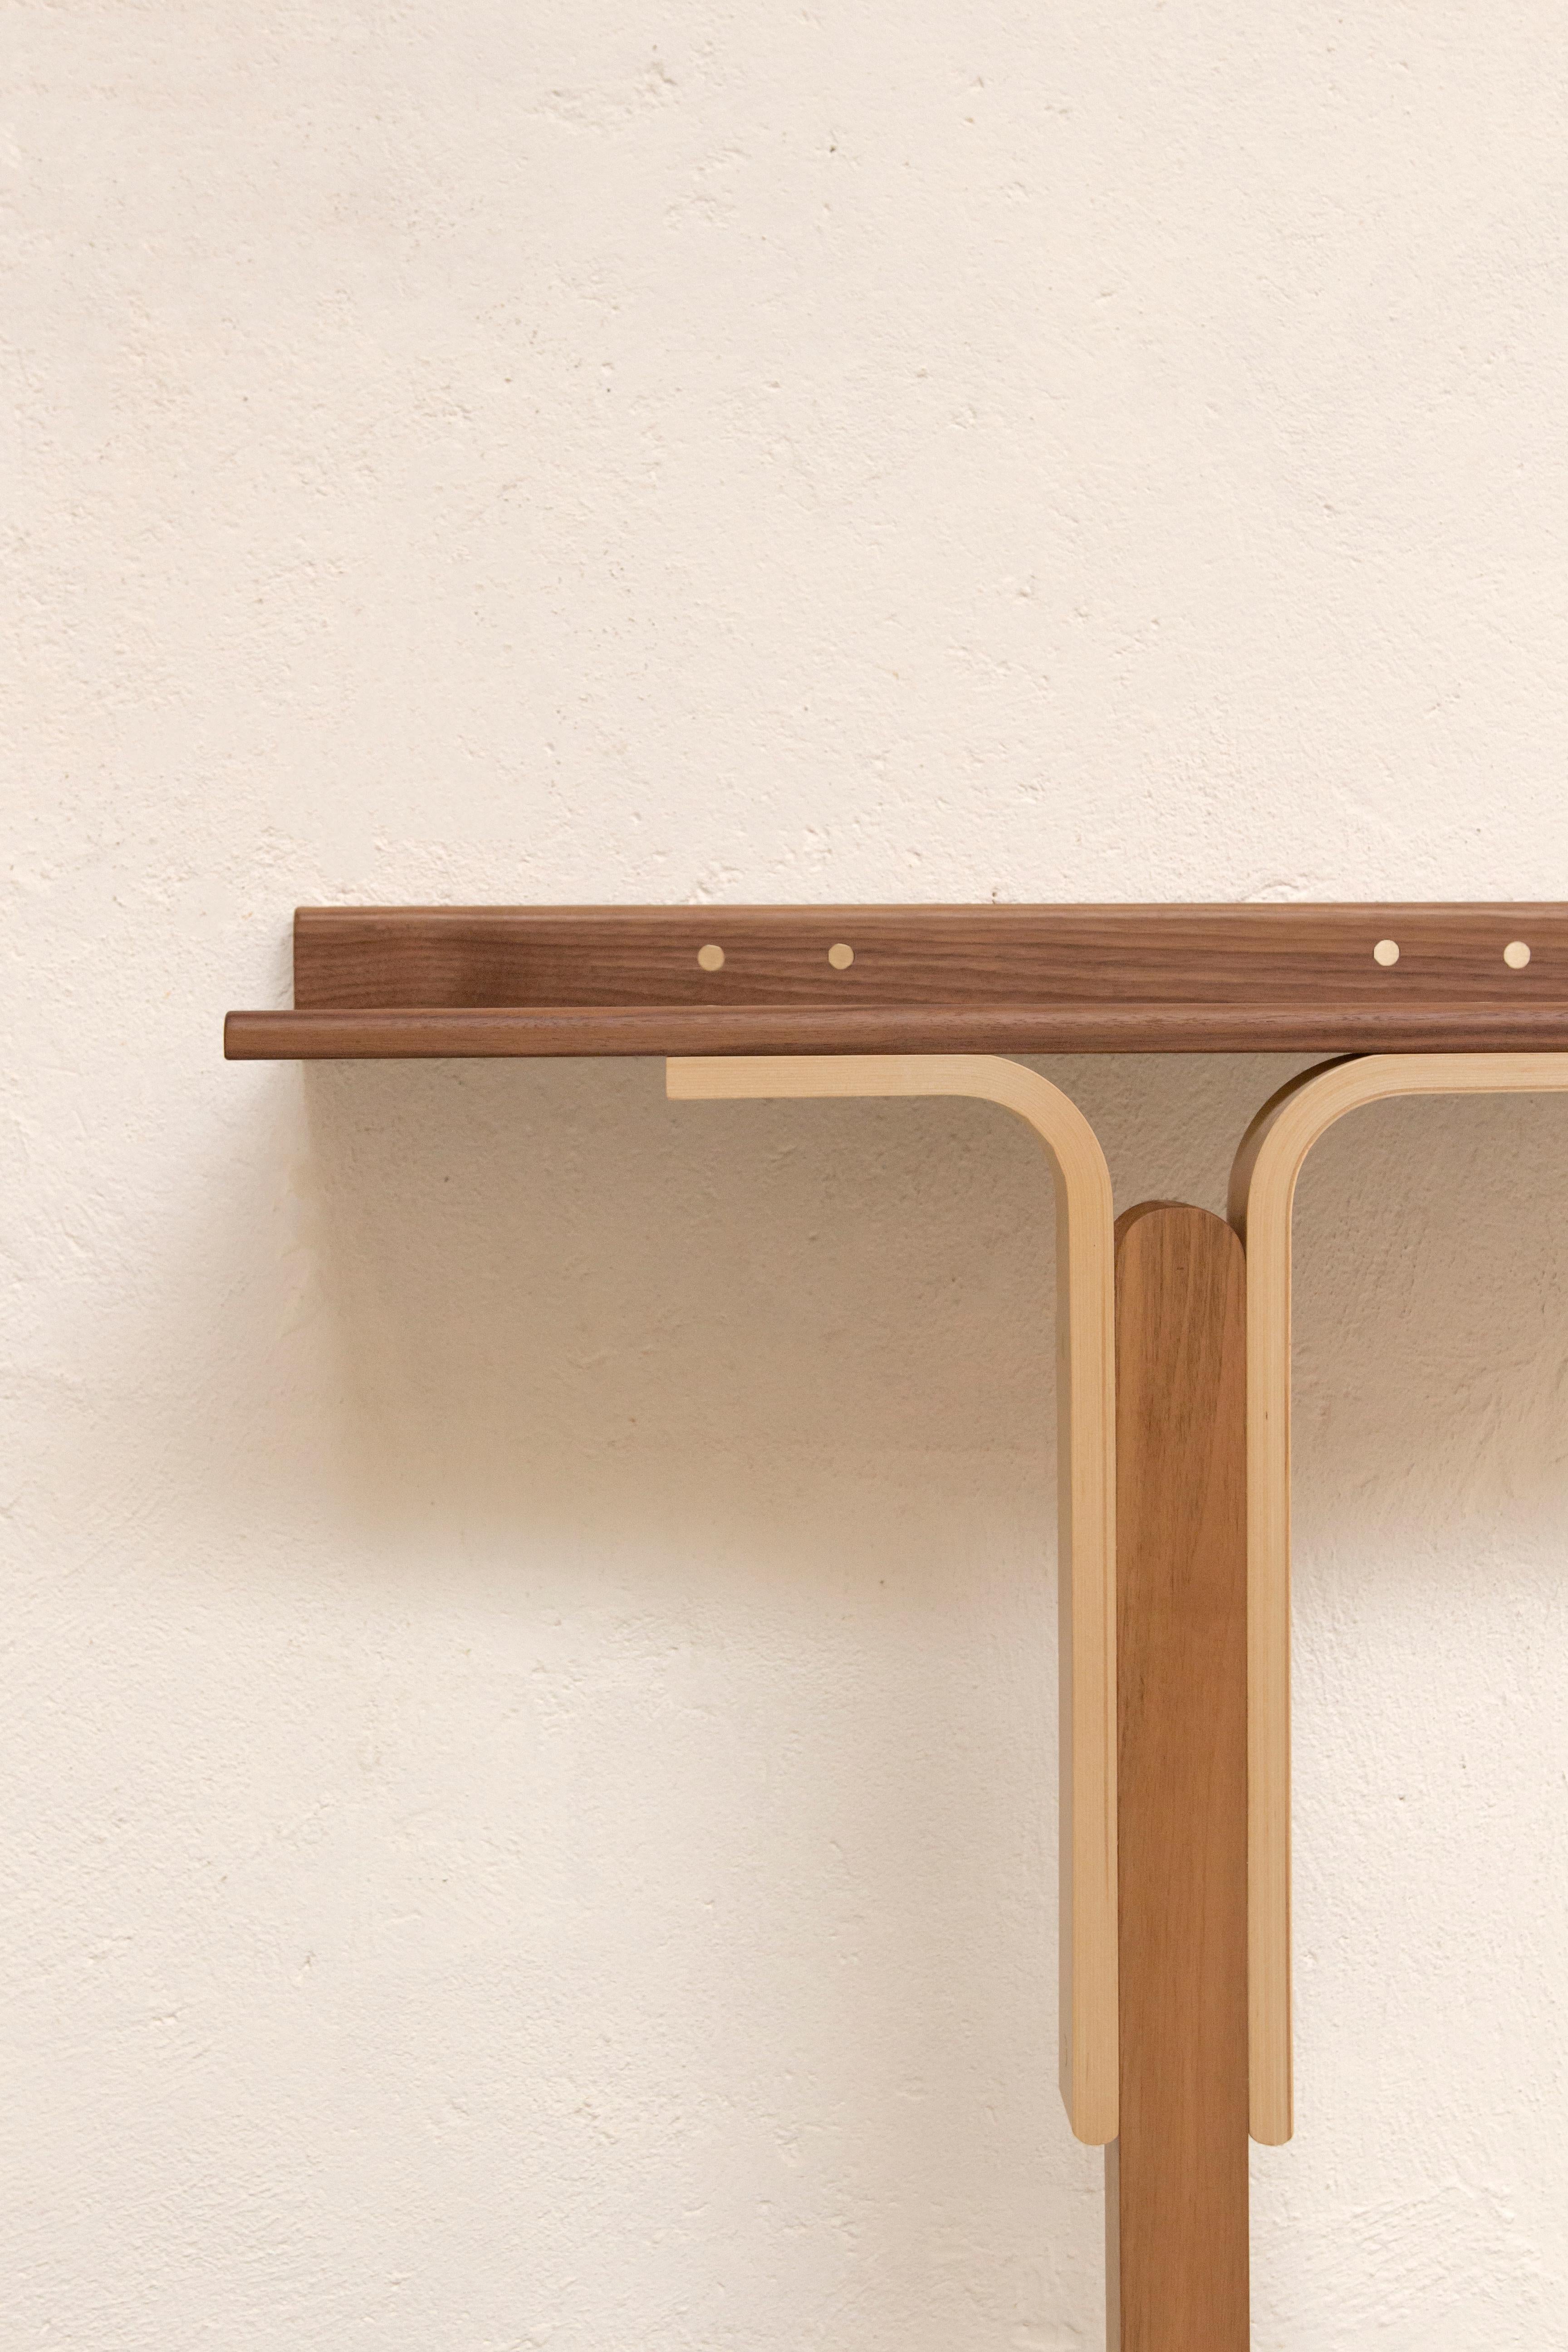 The elegant 21st-century Rennie console table by Ilaria Bianchi is handcrafted in solid Walnut and Ash wood with polished brass joinery. Furniture is pleasantly carved into a beautiful wood decoration. The surface and the leg are made of Walnut